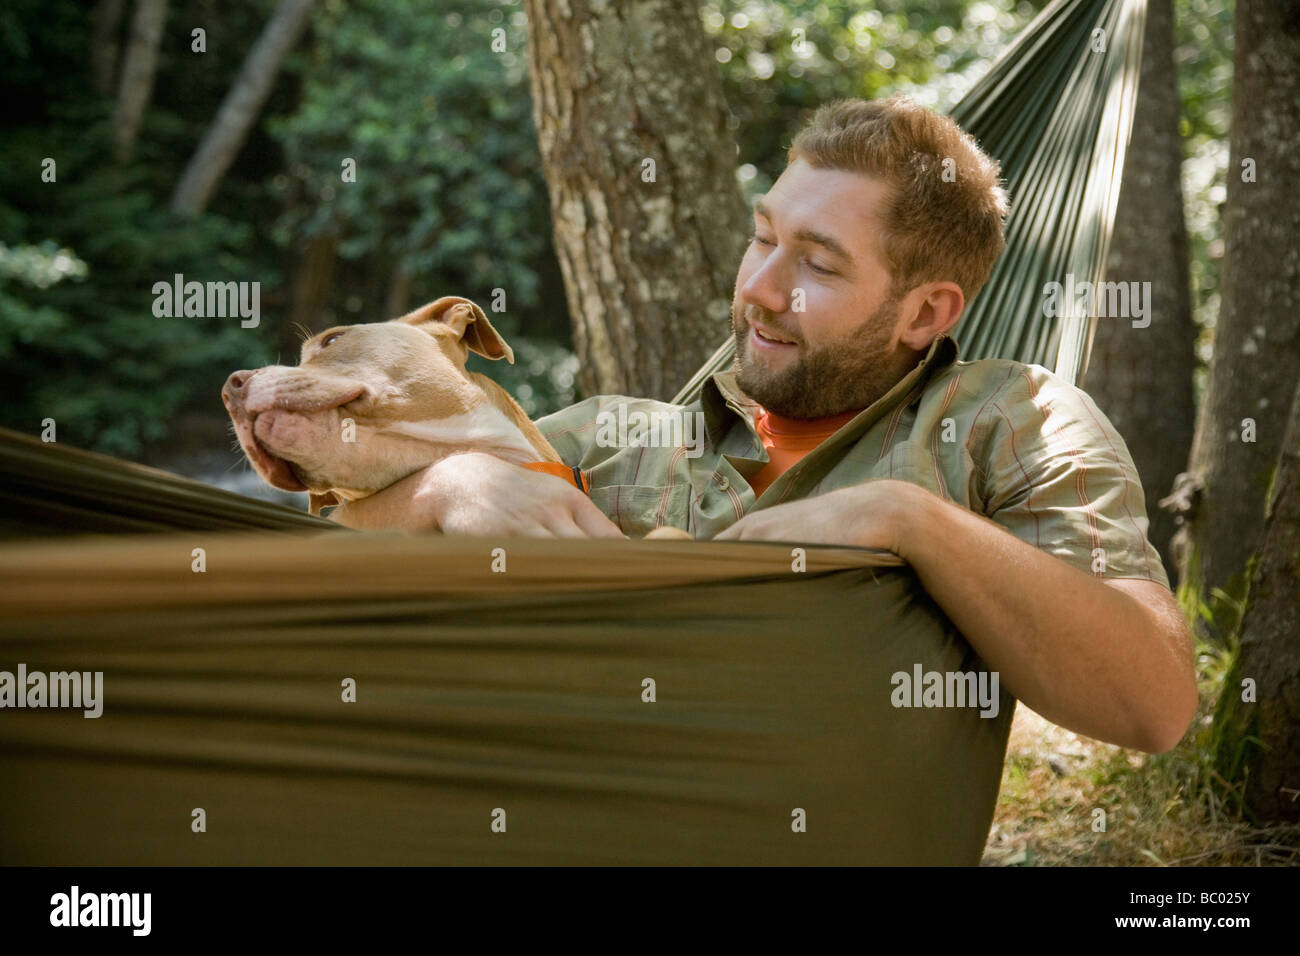 Young man with his dog in a hammock in the woods. Stock Photo